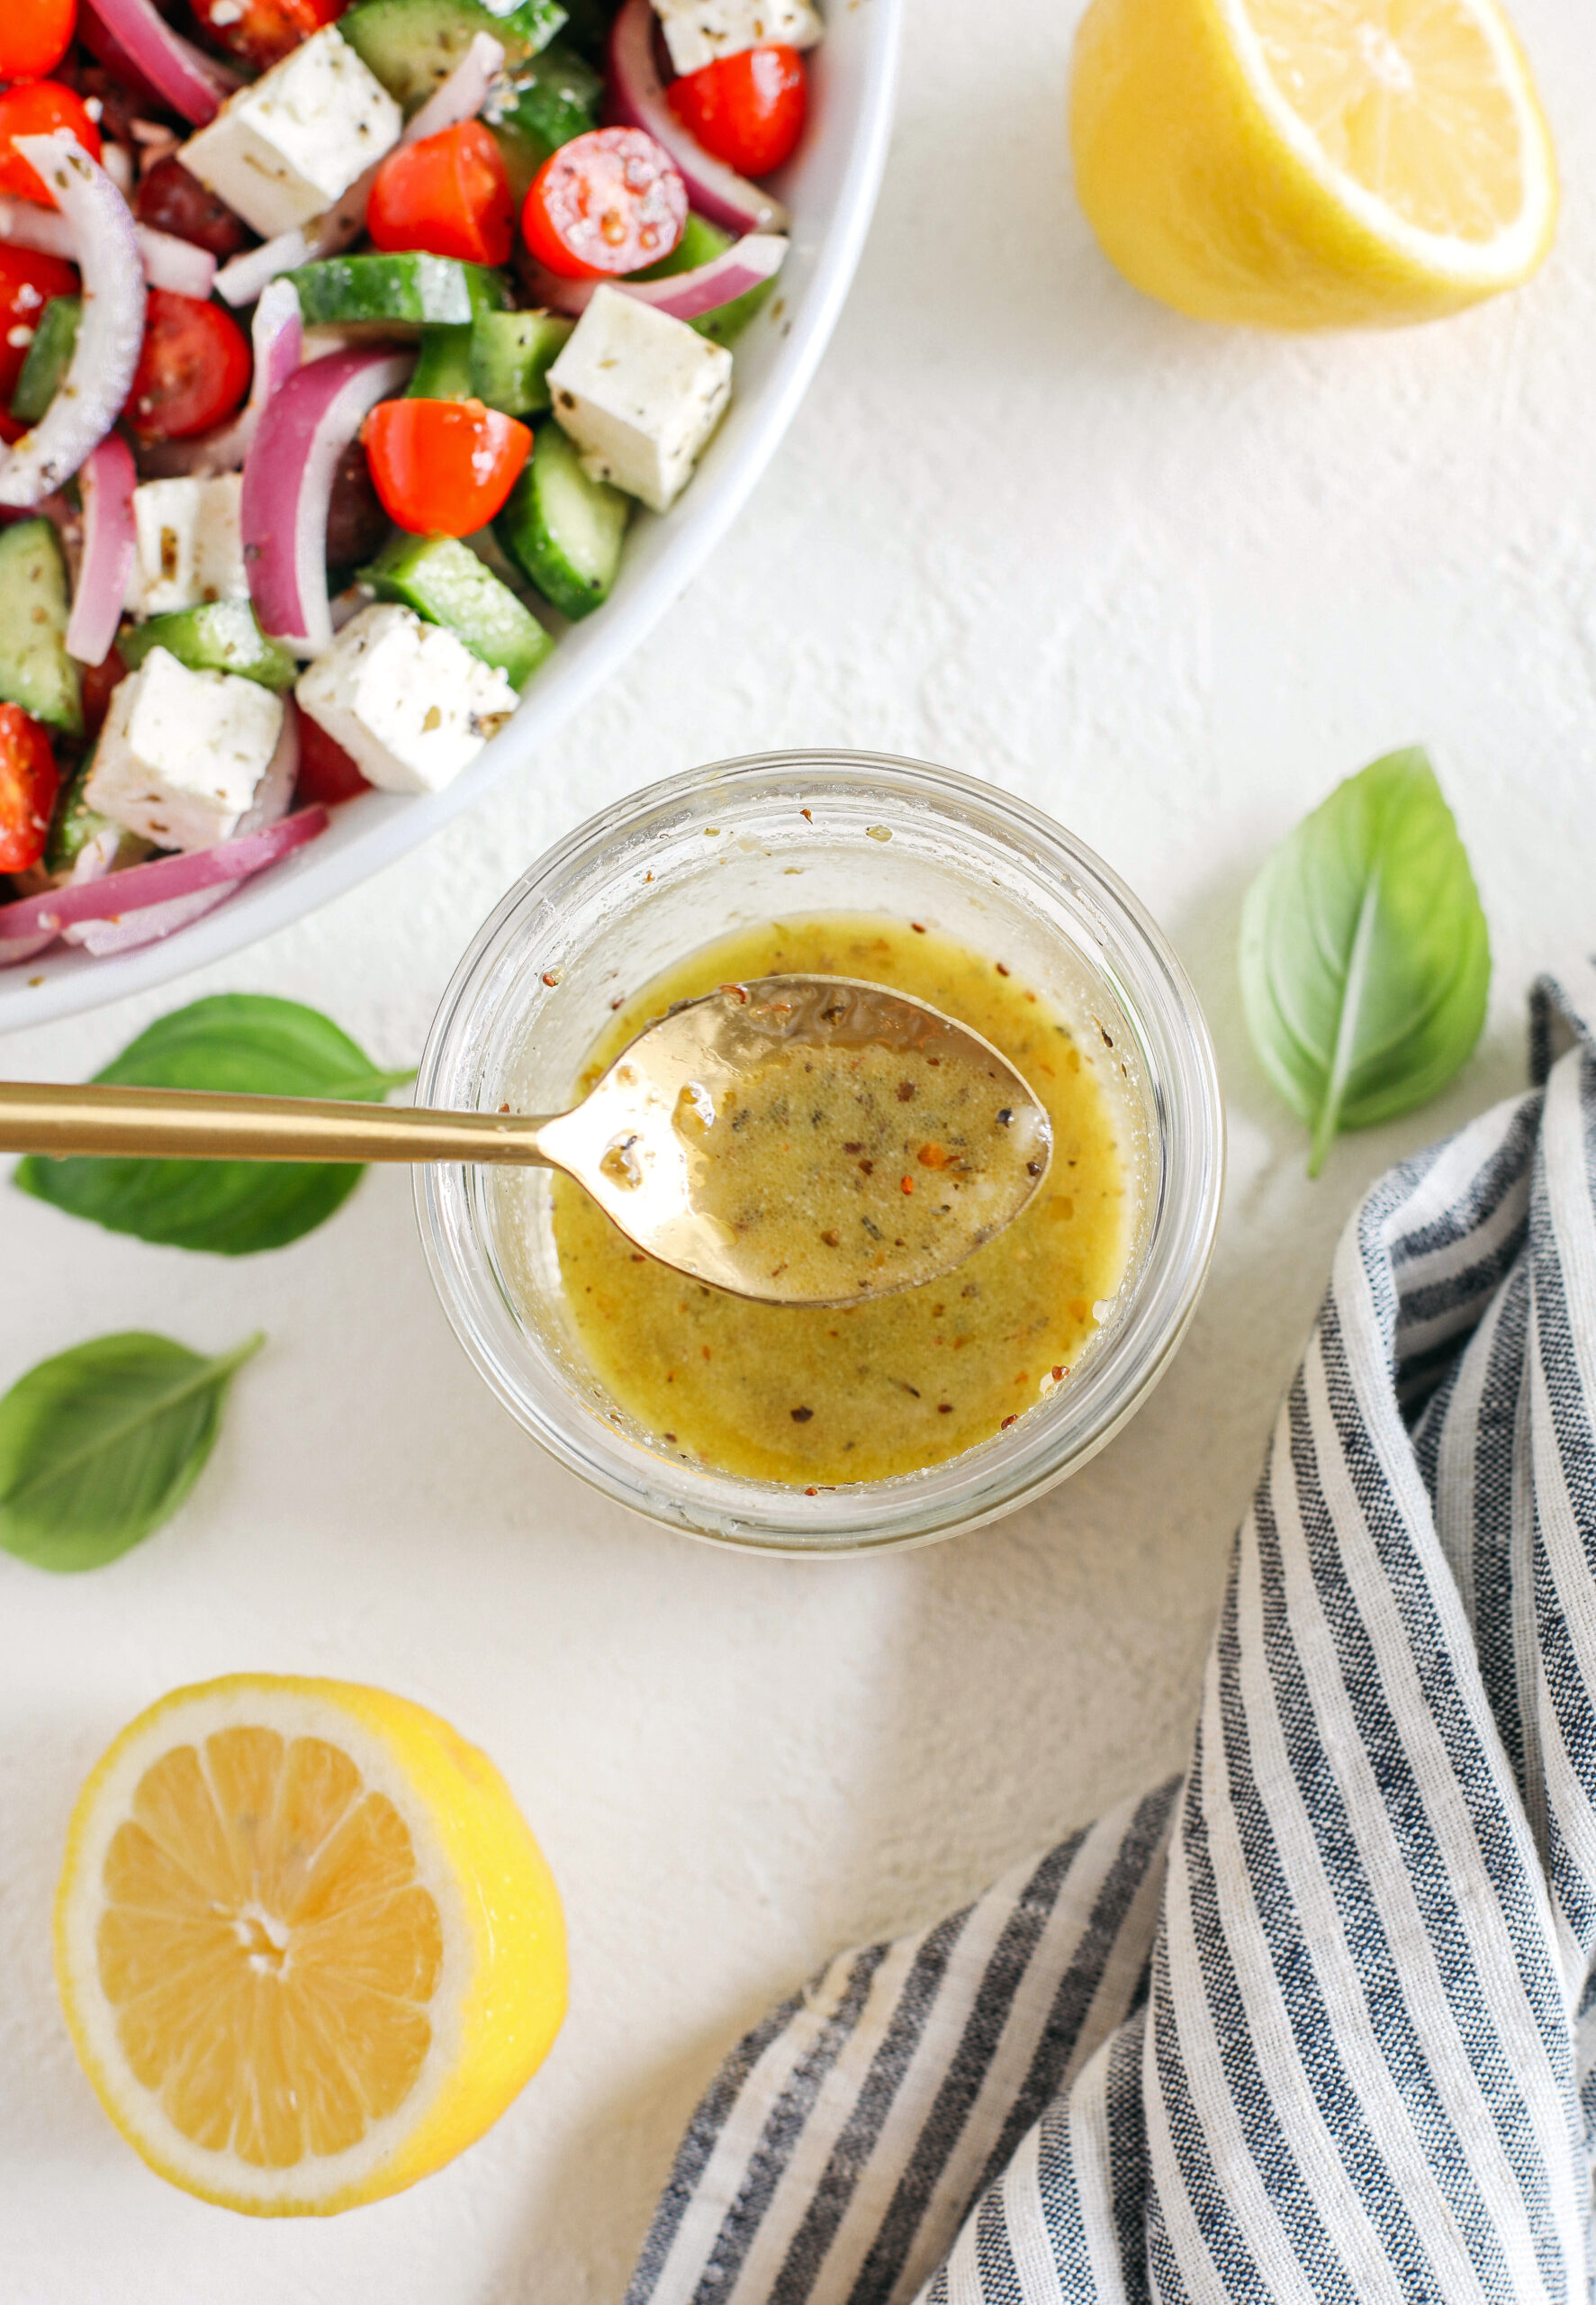 The most delicious homemade Greek Salad Dressing made with simple pantry ingredients perfect over salads, veggies, used as a marinade, pasta salads and more!